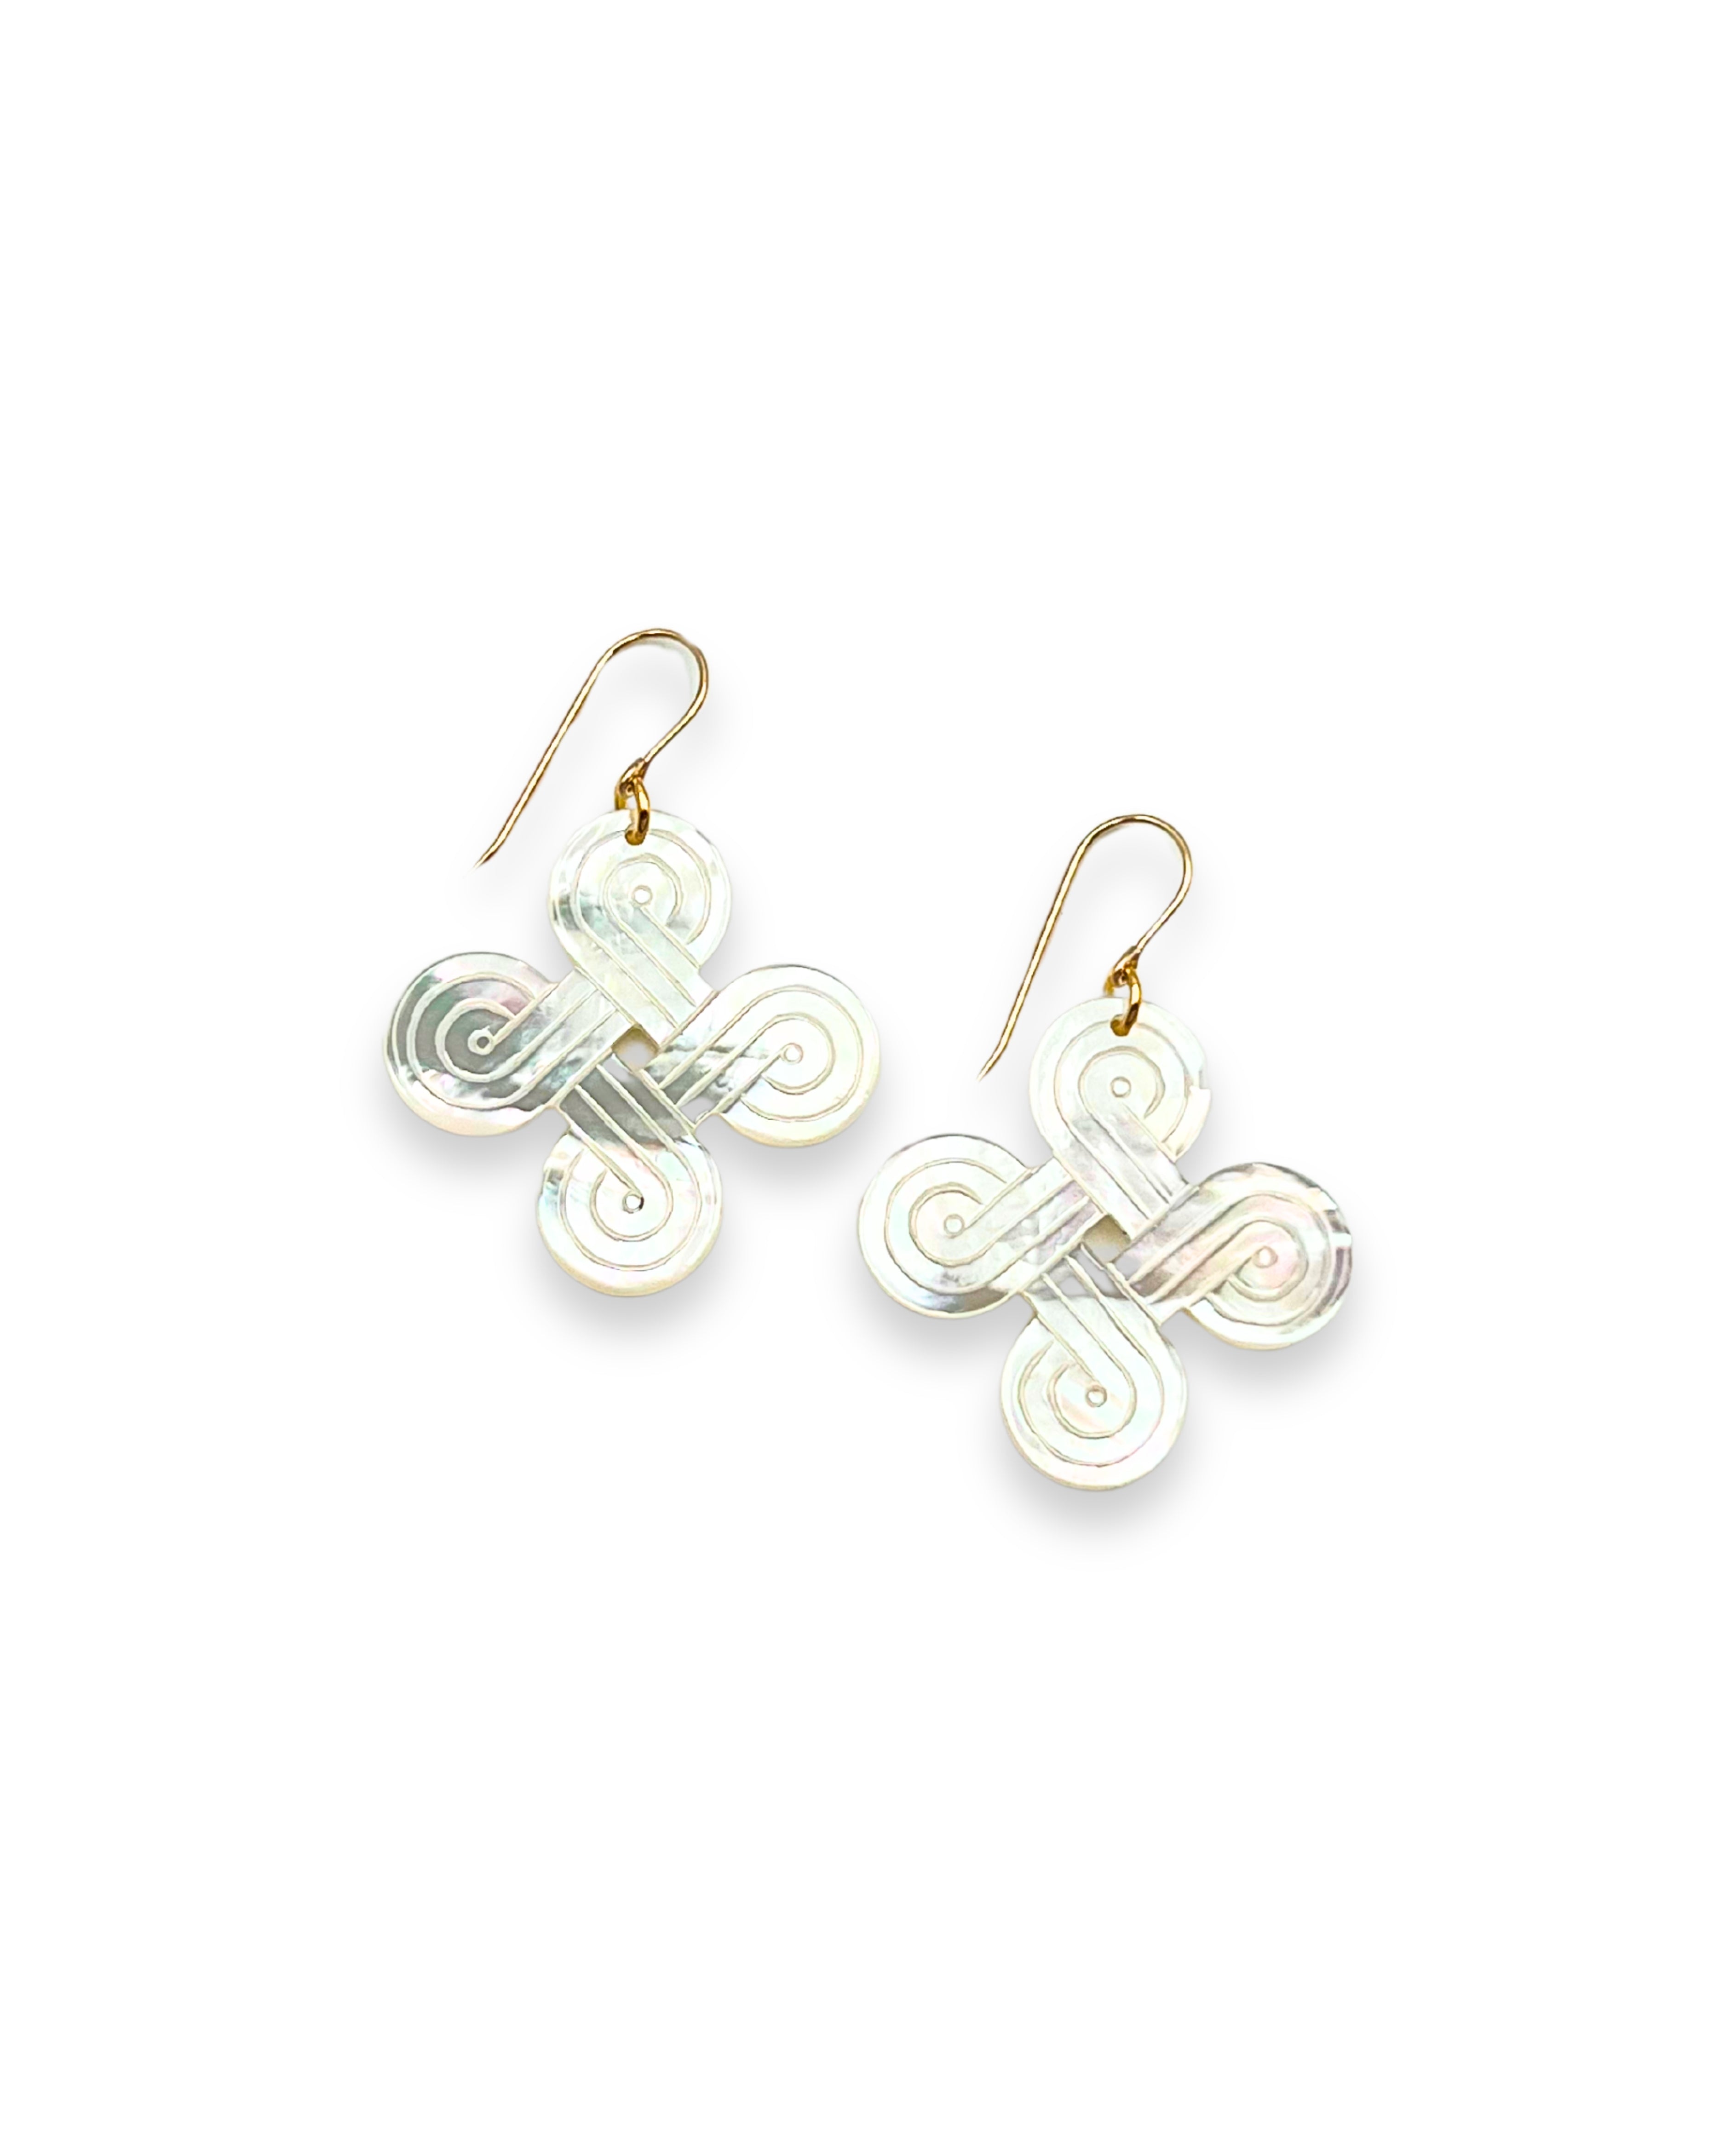 Carved Mother of Pearl Earrings